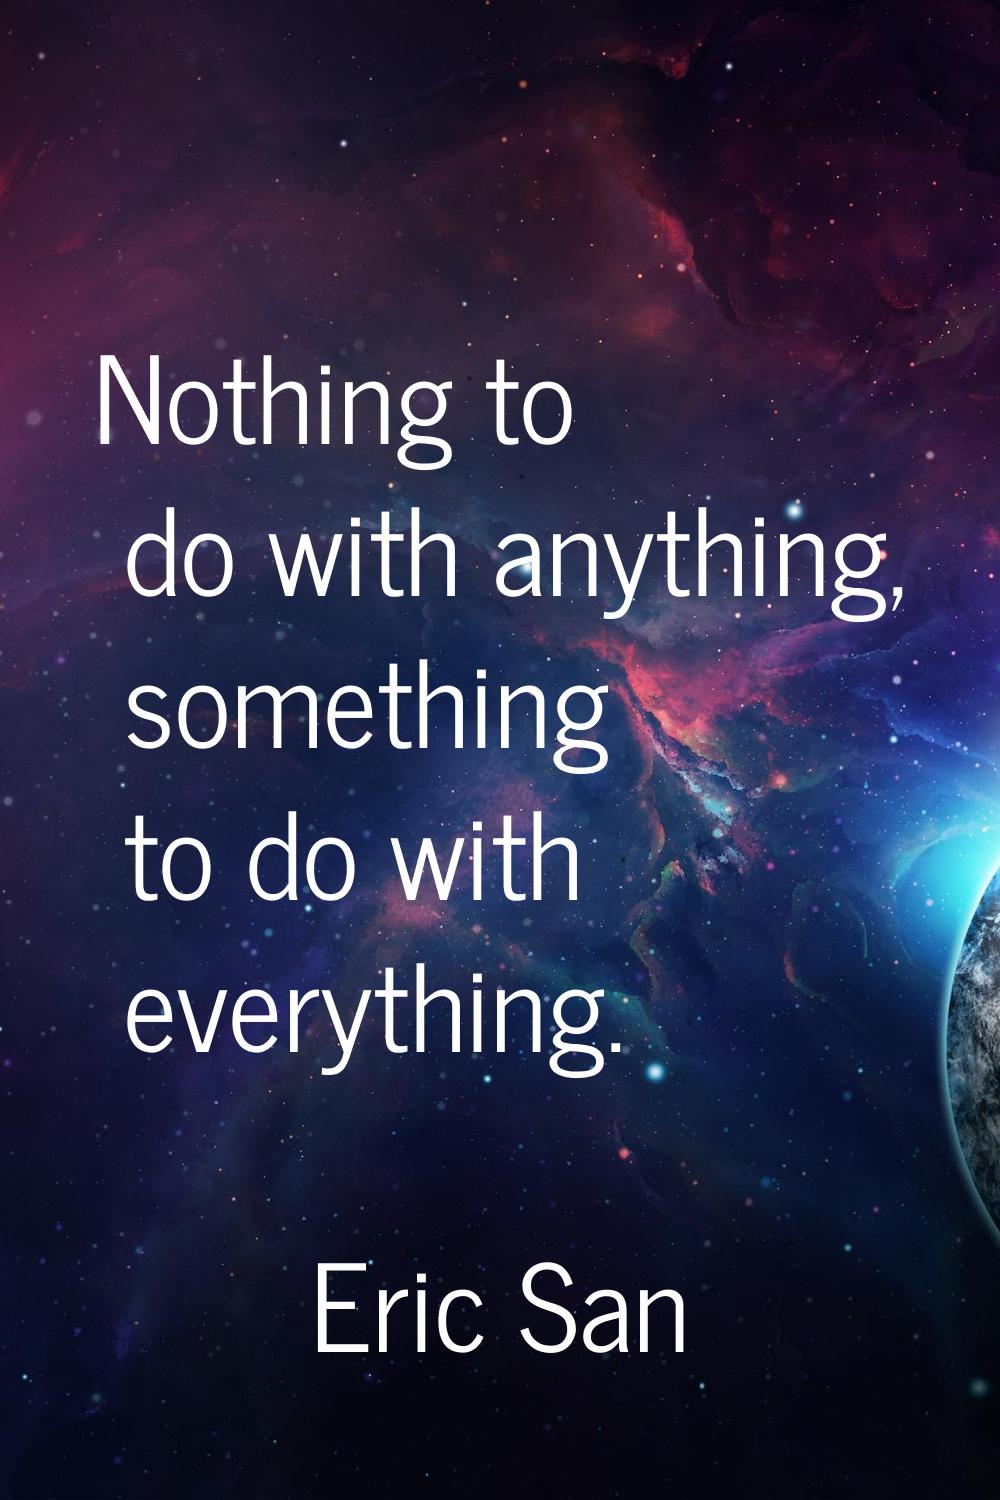 Nothing to do with anything, something to do with everything.